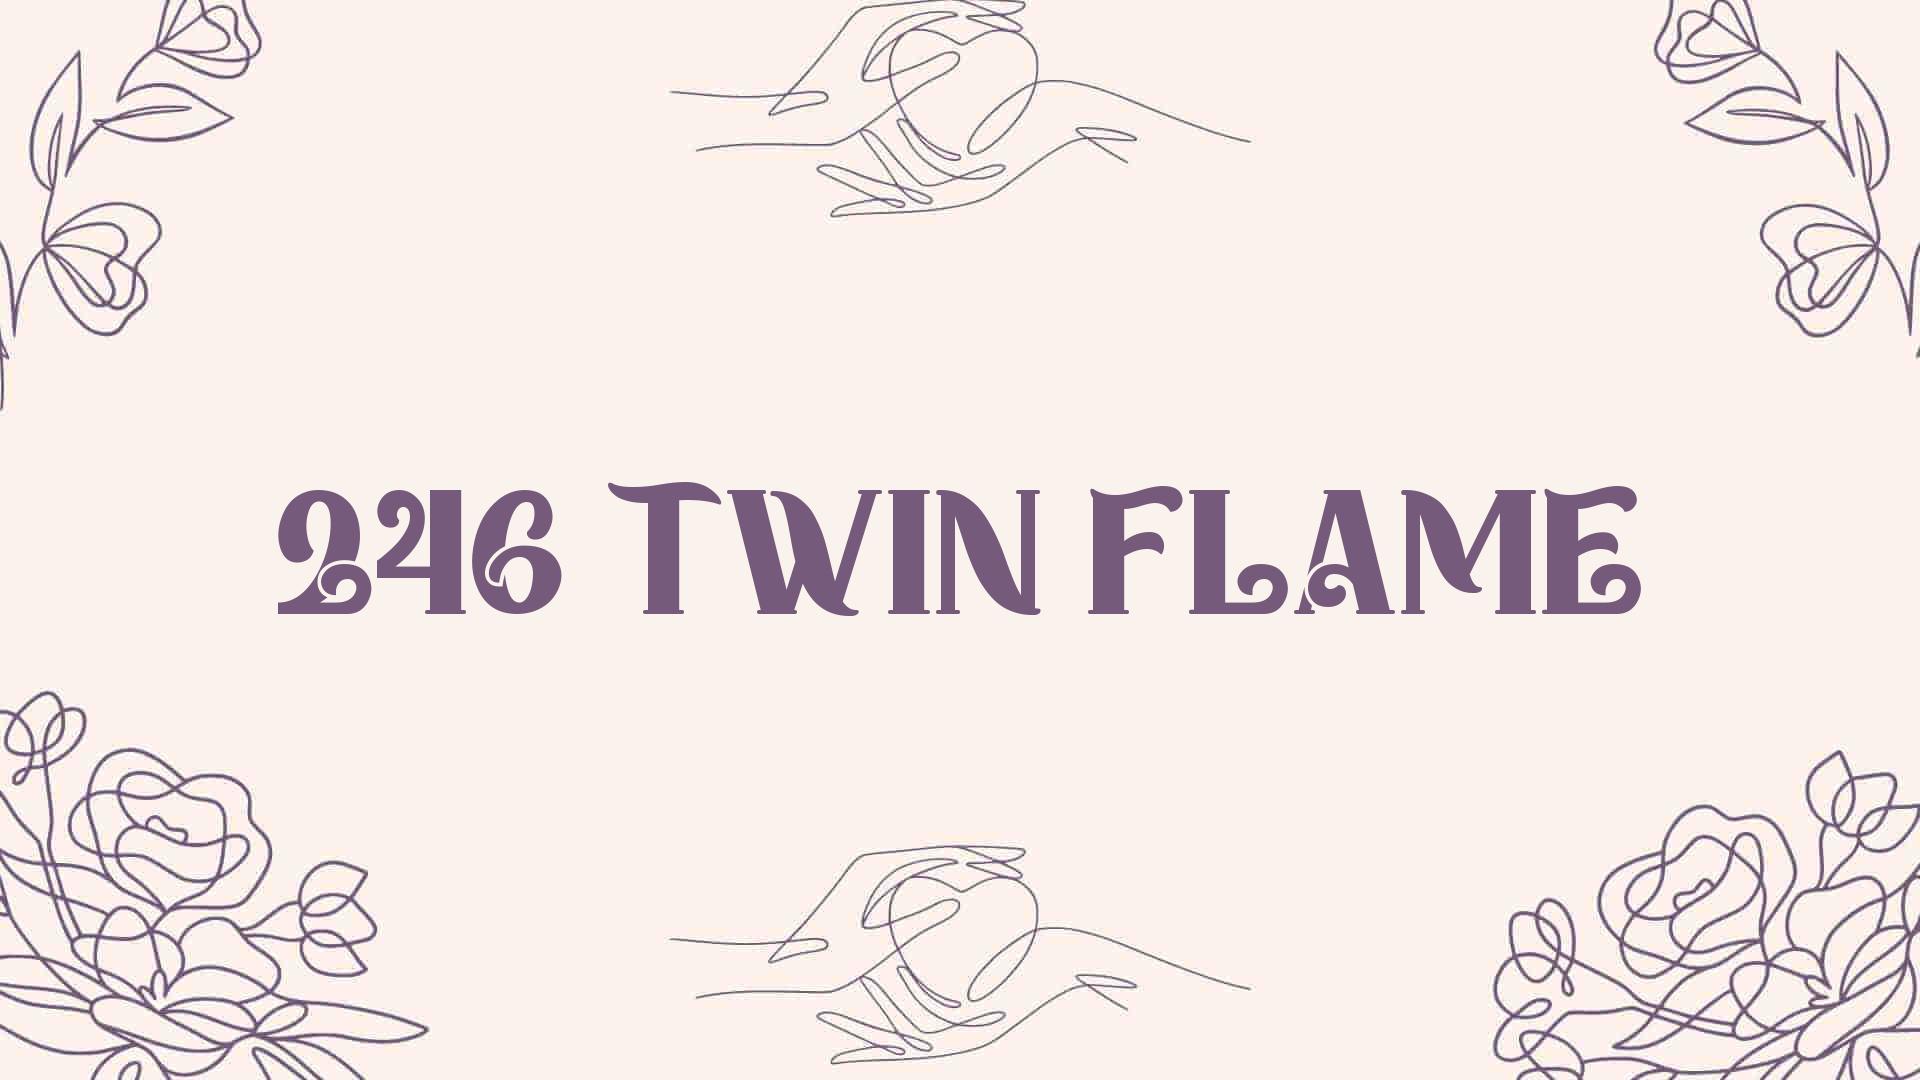 246 twin flame [ Meaning Revealed ]